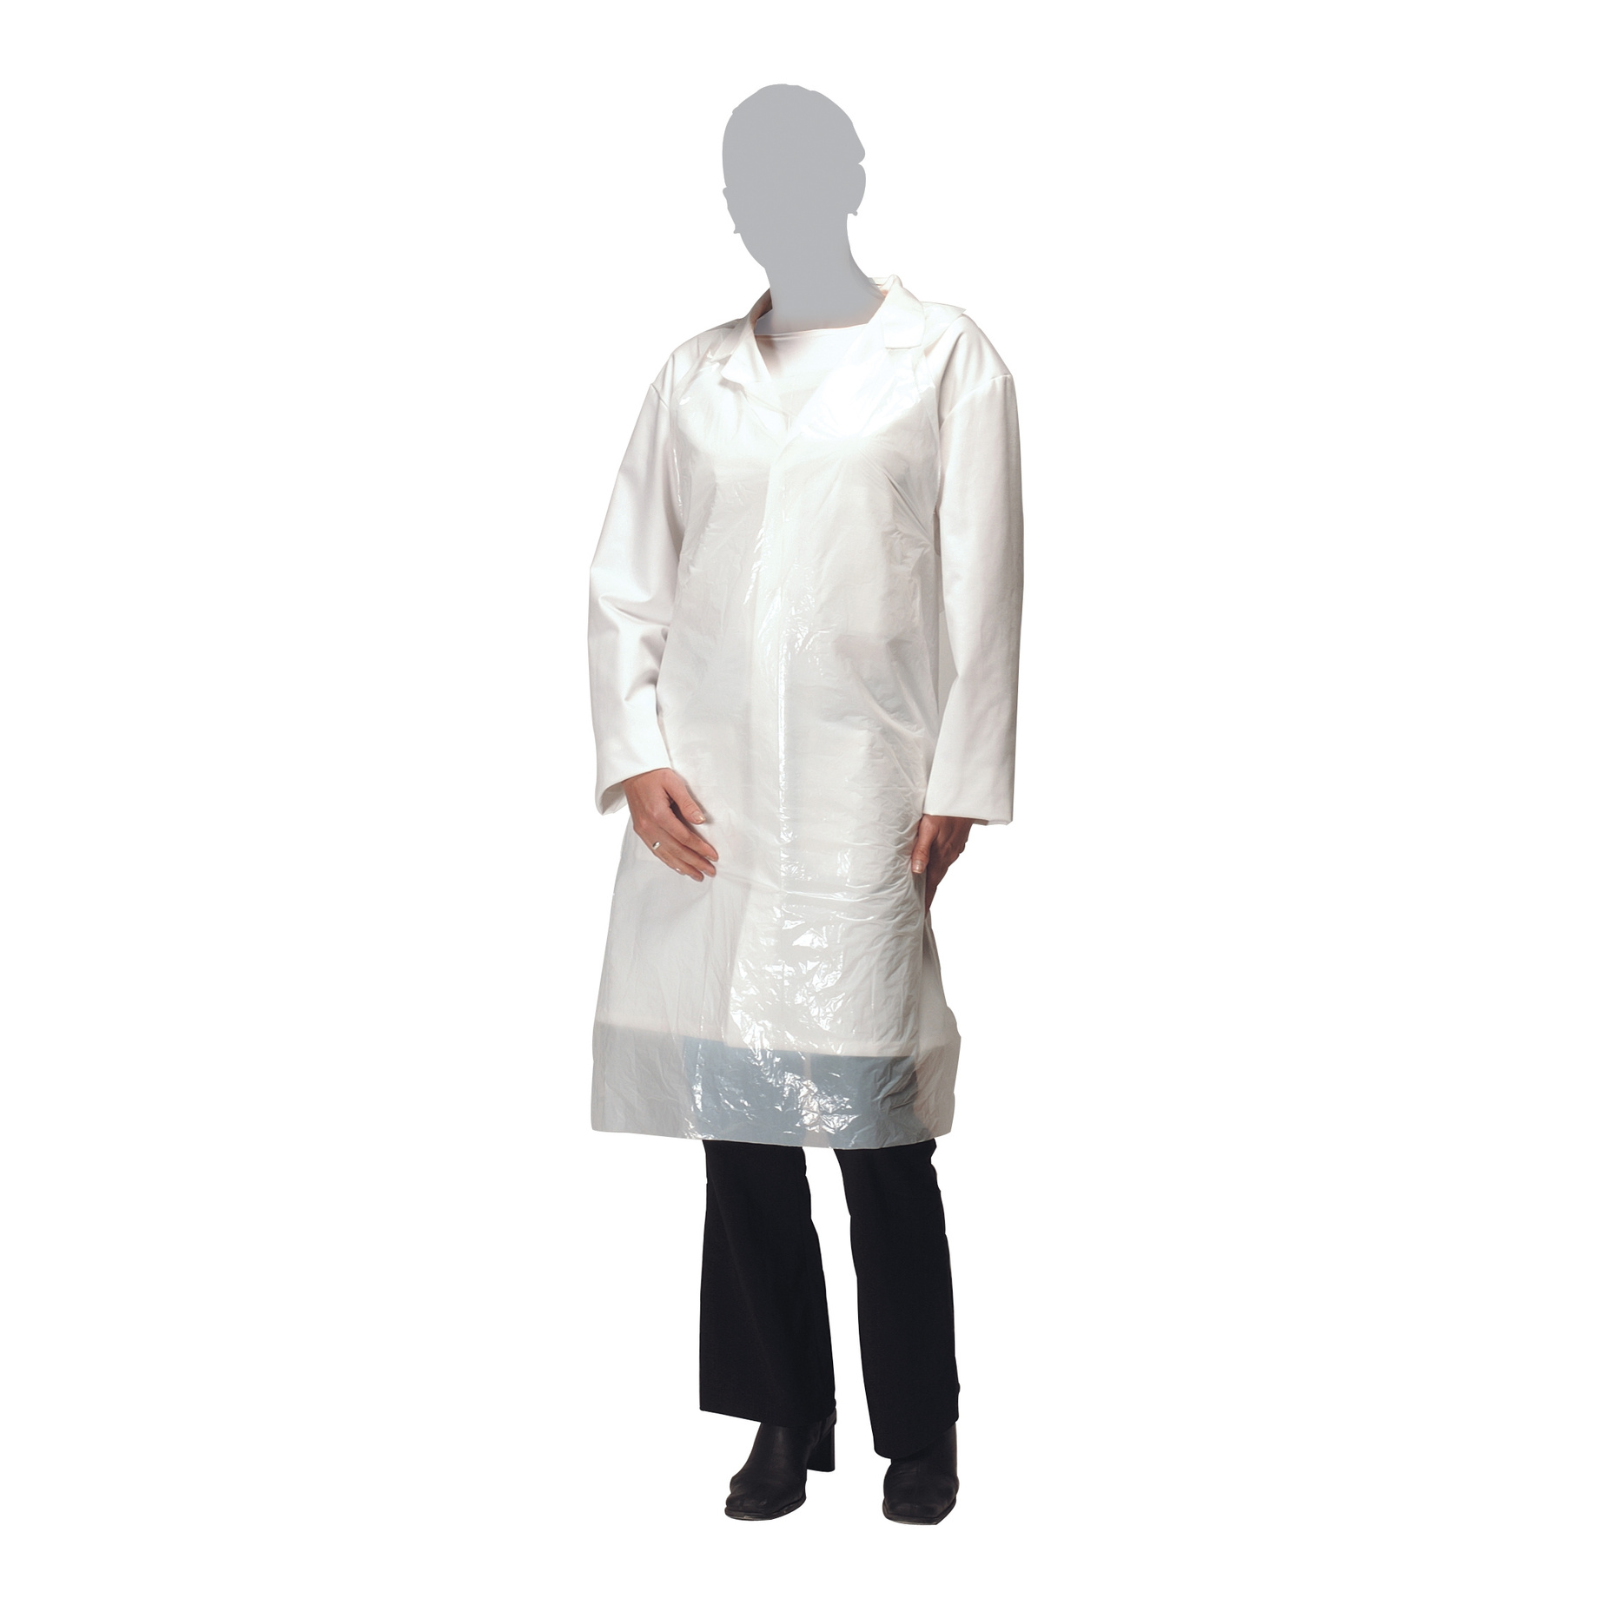 51" Polythene Disposable Aprons- White - Flat Packed - Heavy Duty